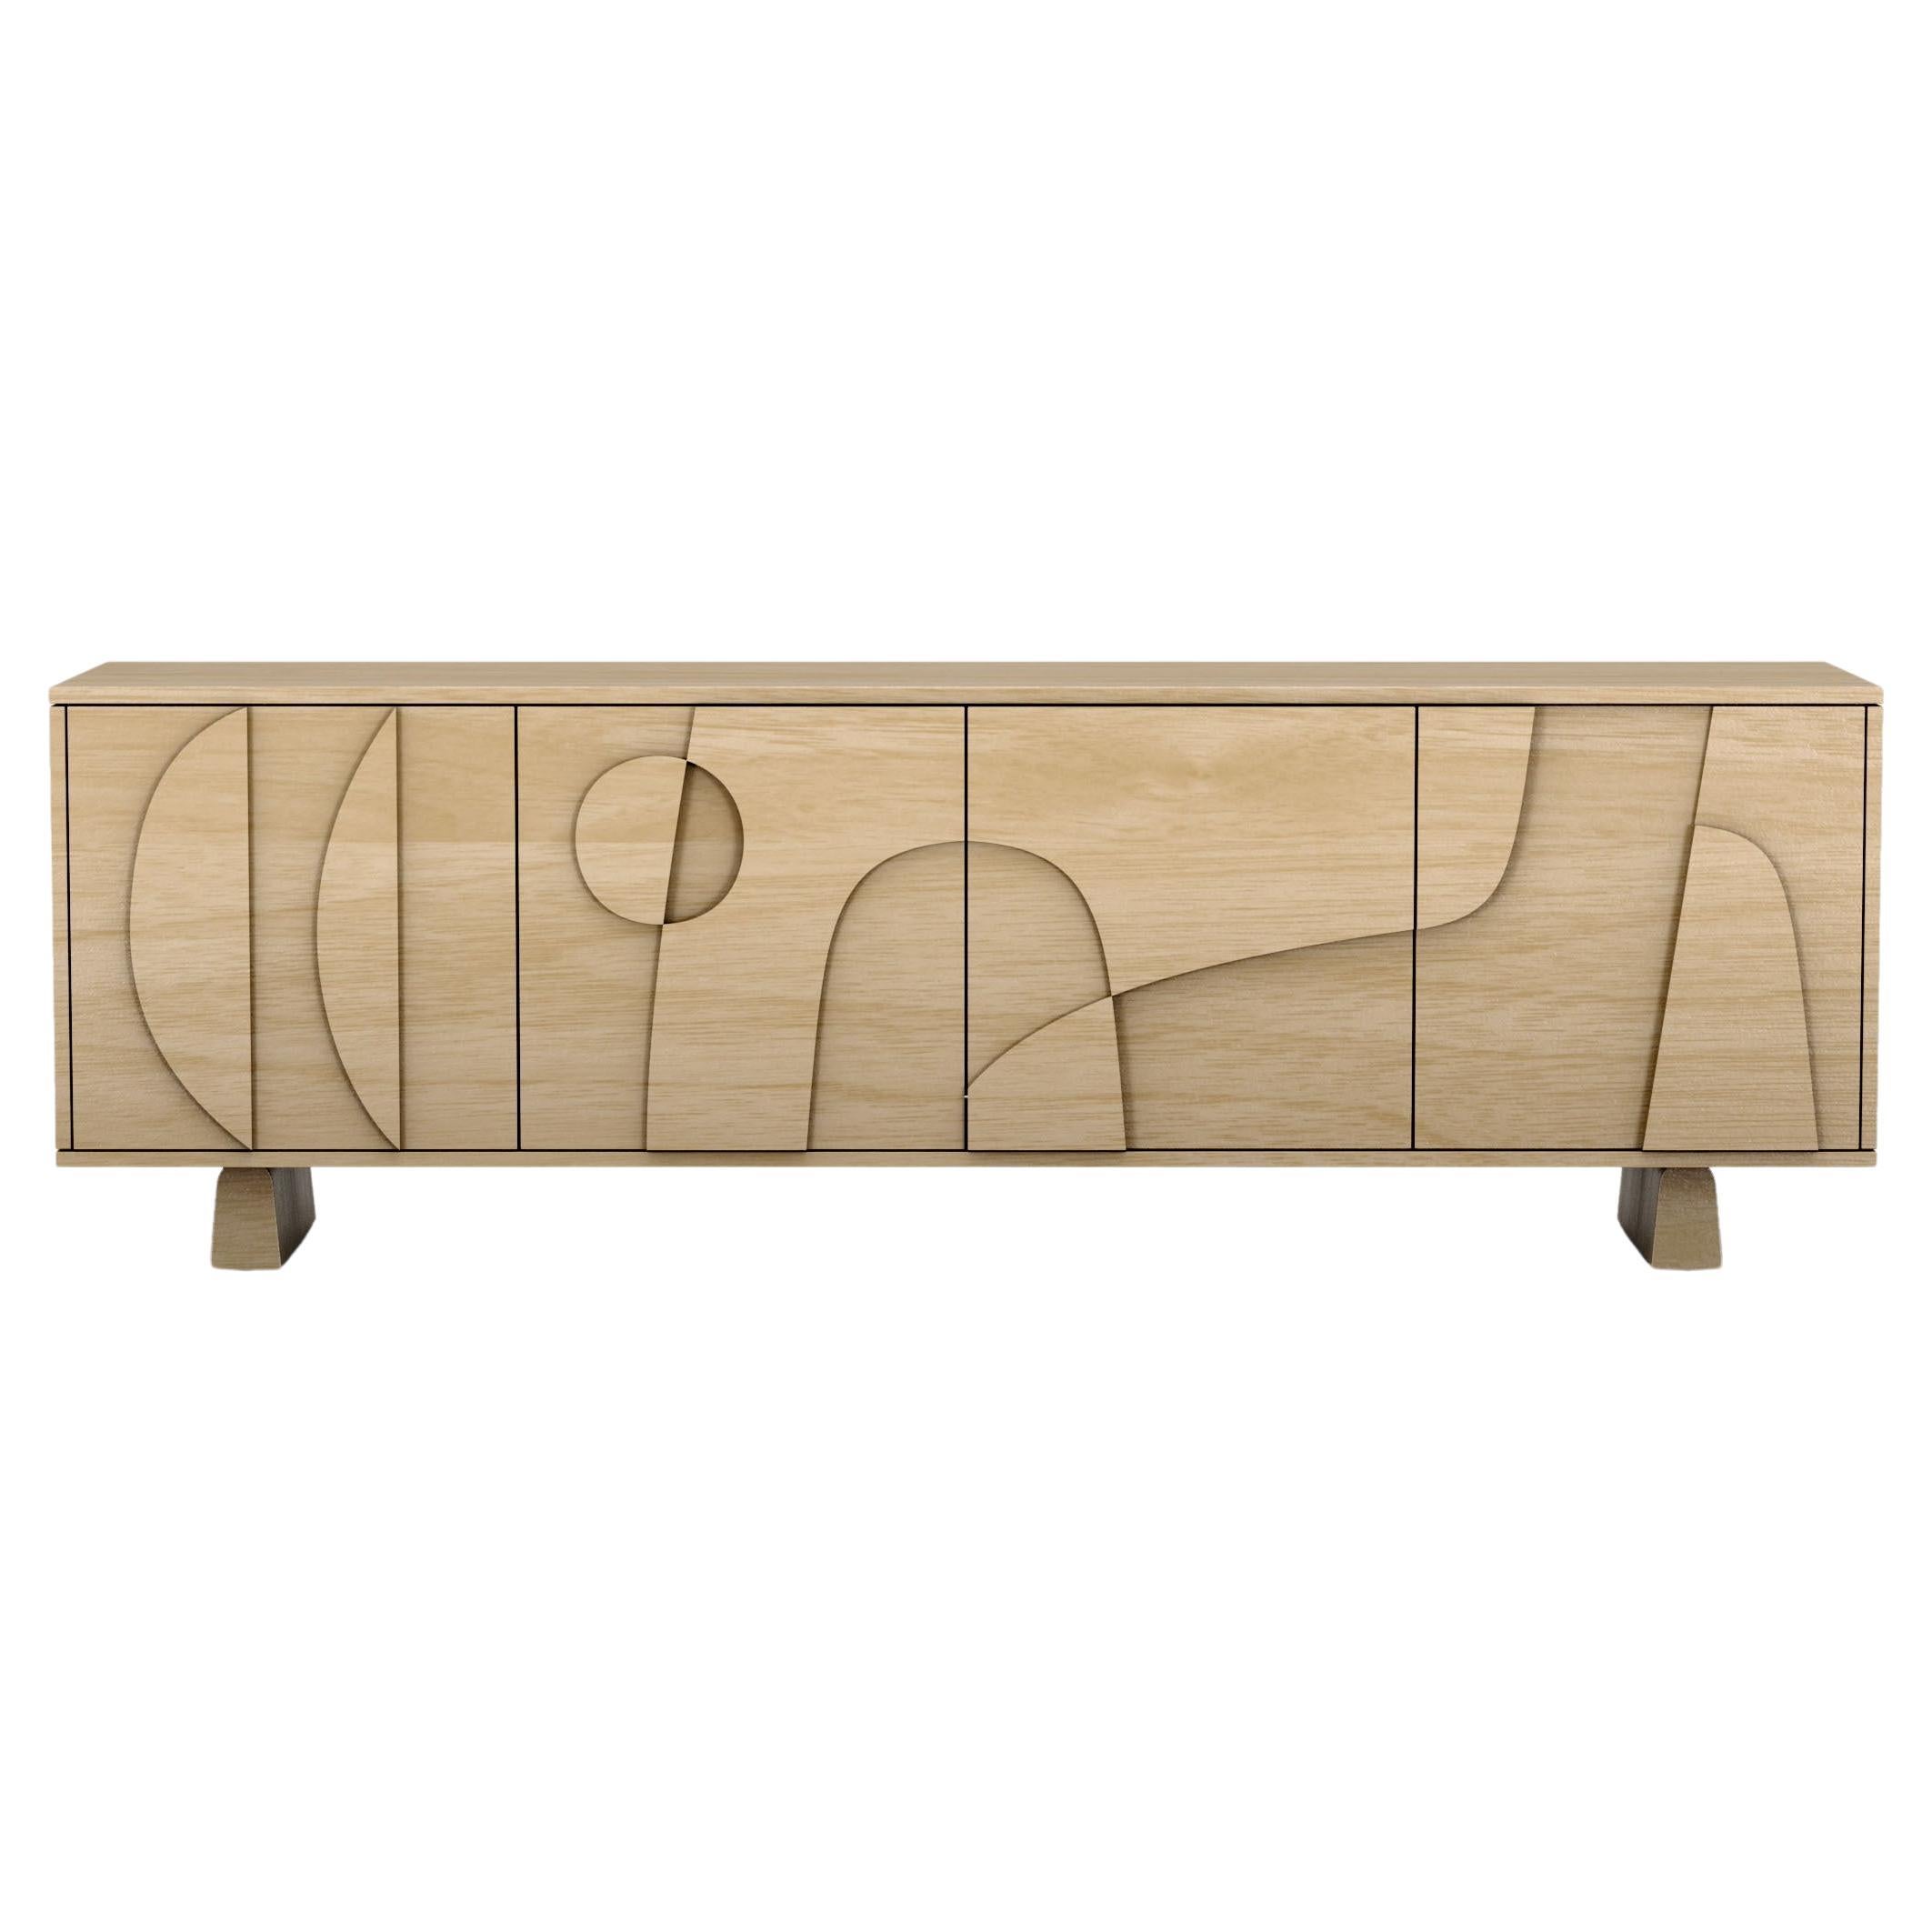 Contemporary 'Wynwood' 4 Sideboard by Man of Parts, Nude Oak, Short Legs For Sale